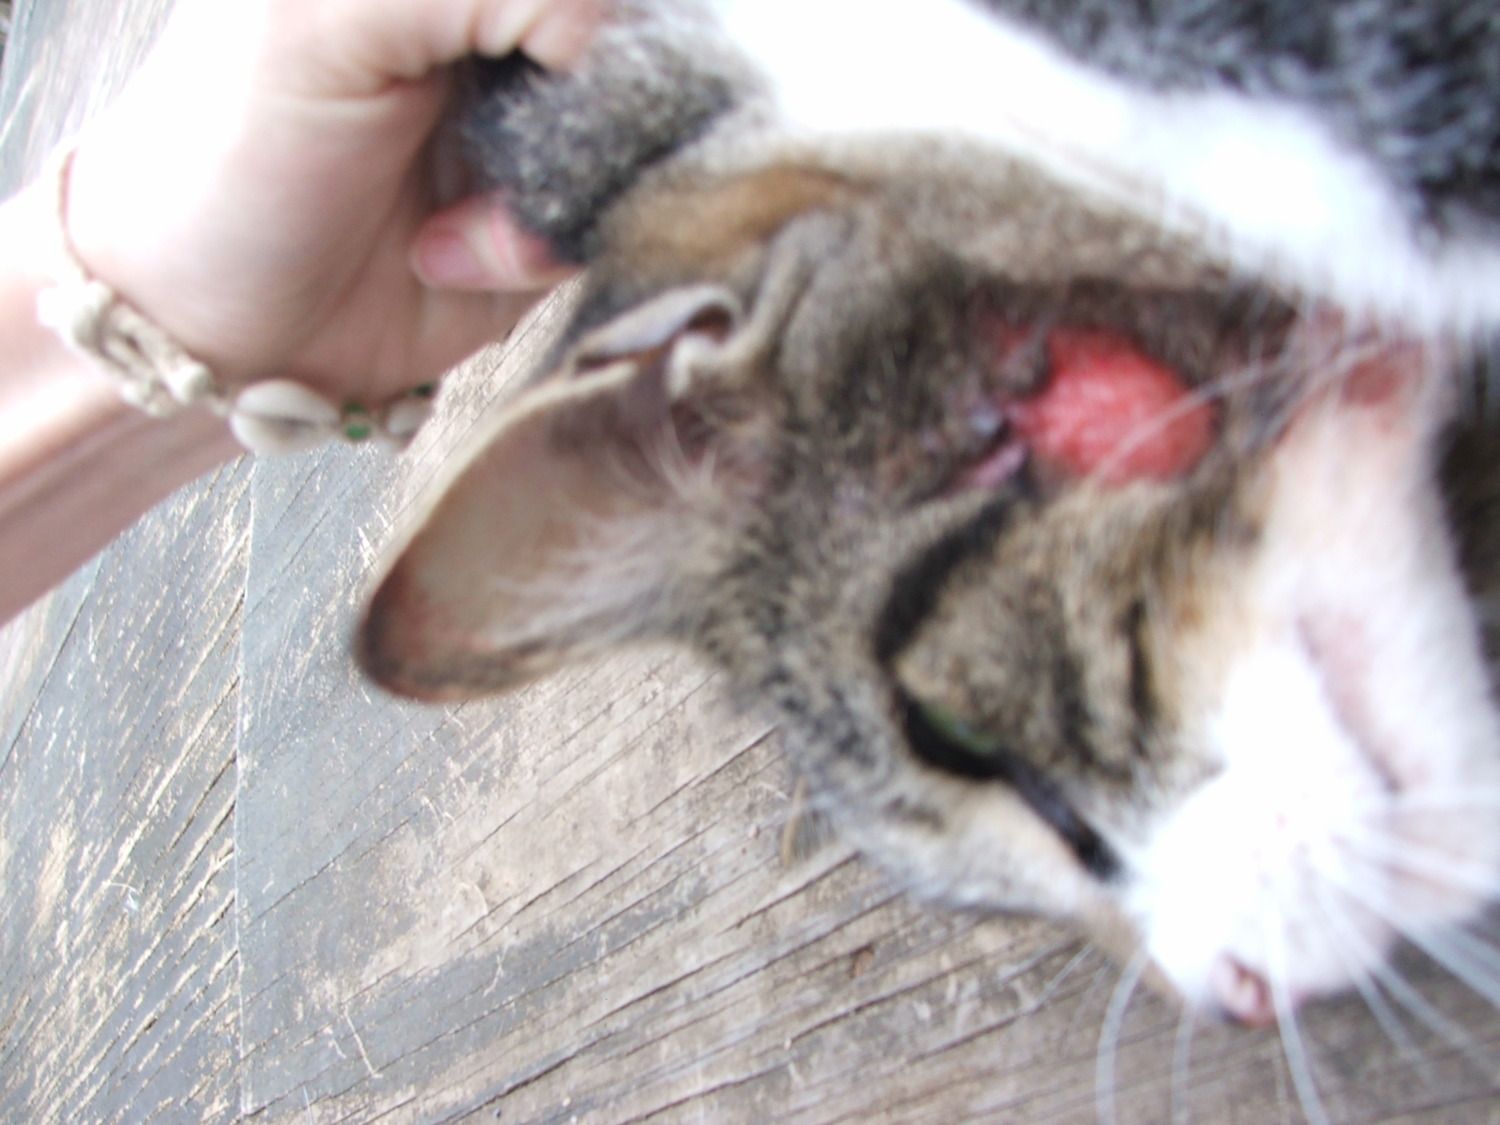 Cat With Bloody Patches Of Hairless Skin! Disease or Injury? **GRAPHIC